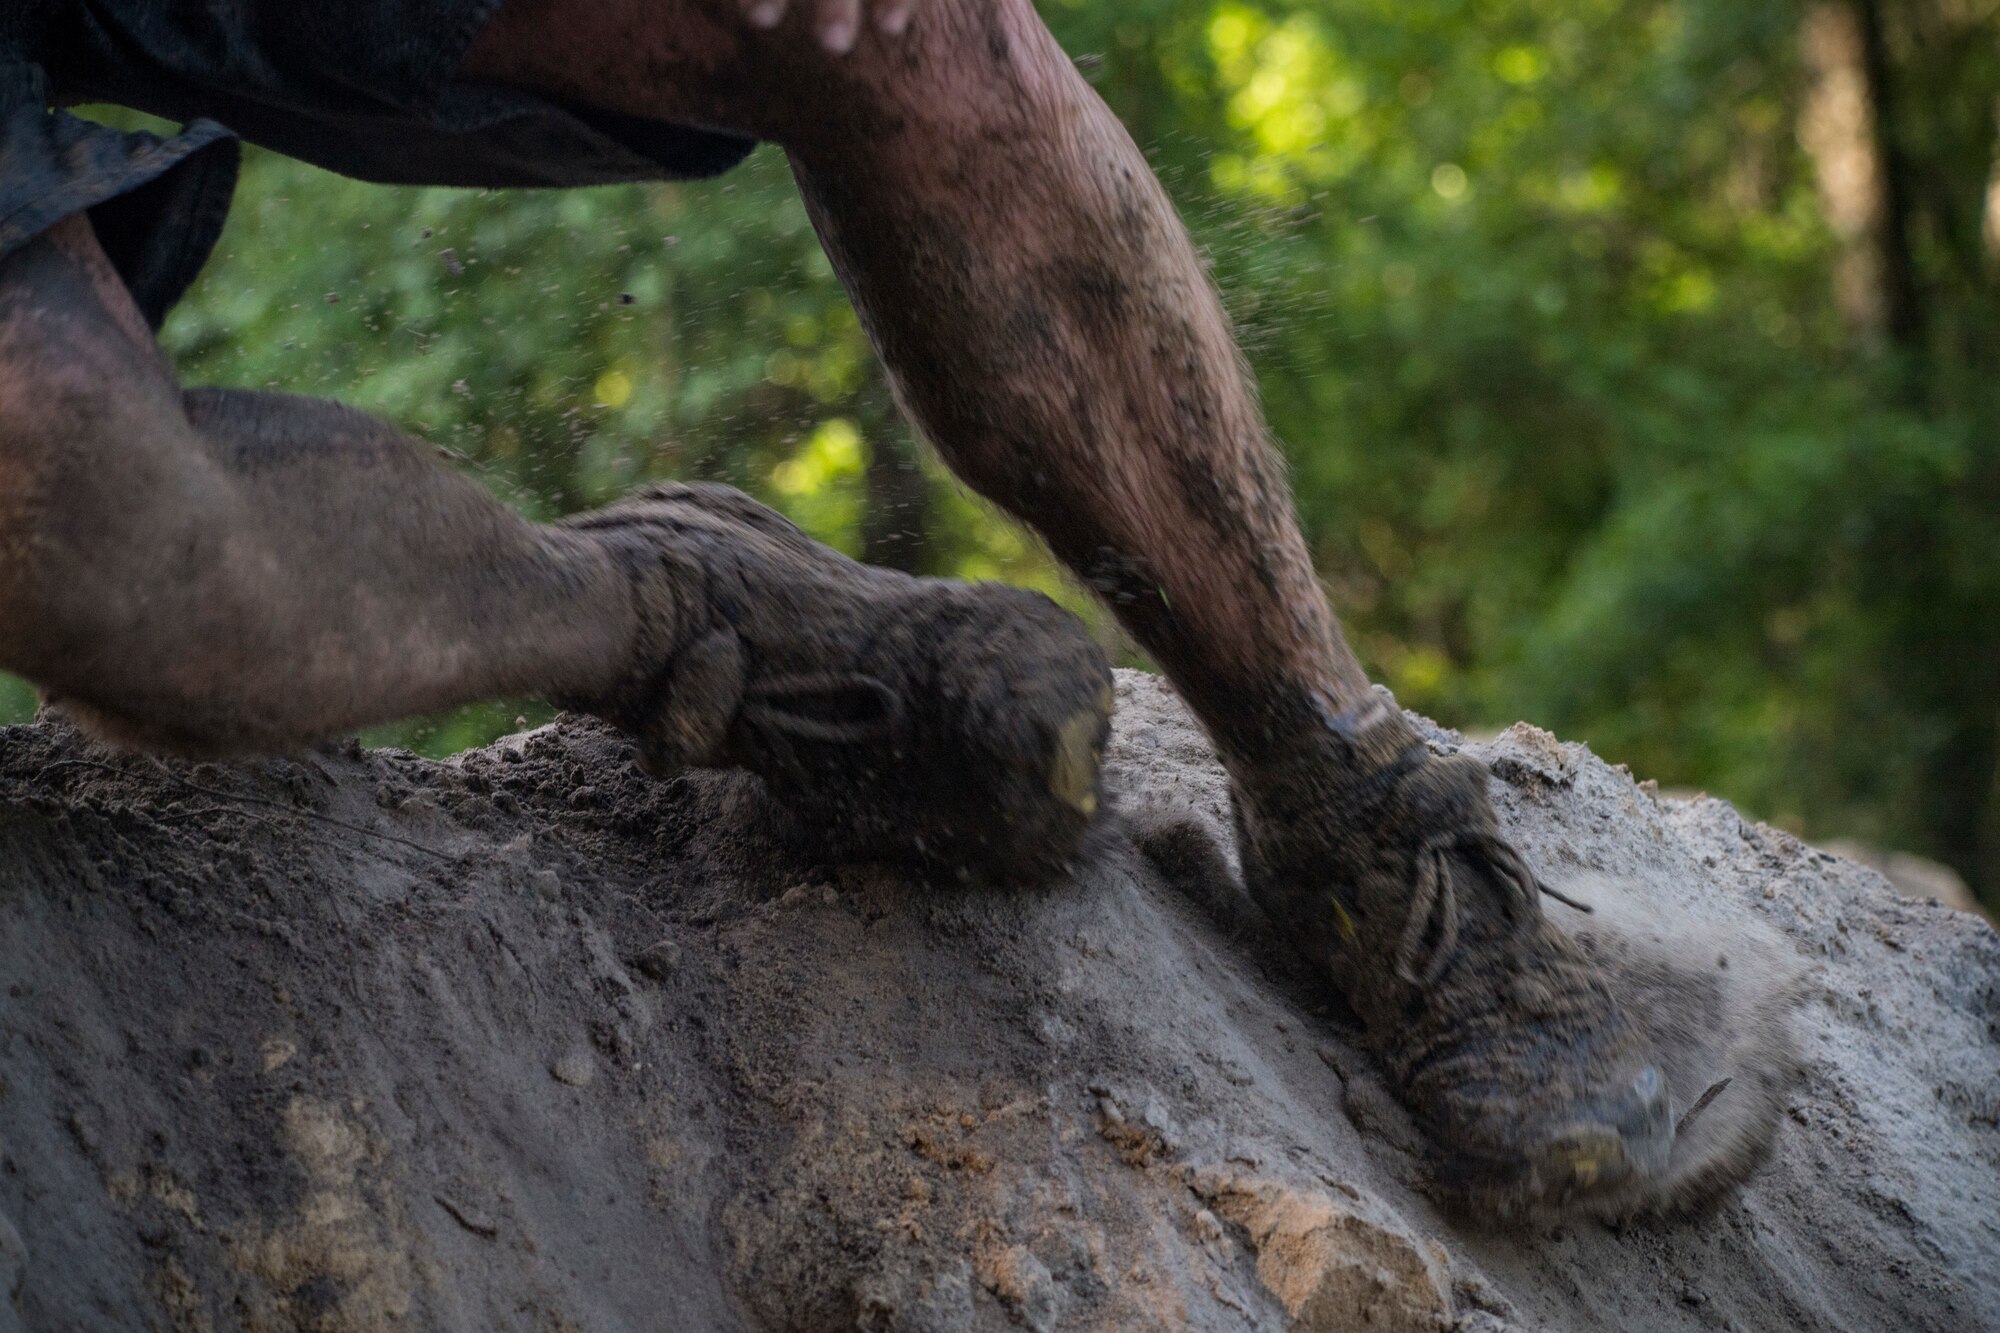 A Moody Mud Run participant slides down a hill, May 5, 2018, in Ray City, Ga. Participants trekked 4.6 miles through the mud, water and 29 obstacles that made up the course. This is the fifth year Moody has hosted the event and more than 800 patrons participated. (U.S. Air Force photo by Senior Airman Janiqua P. Robinson)